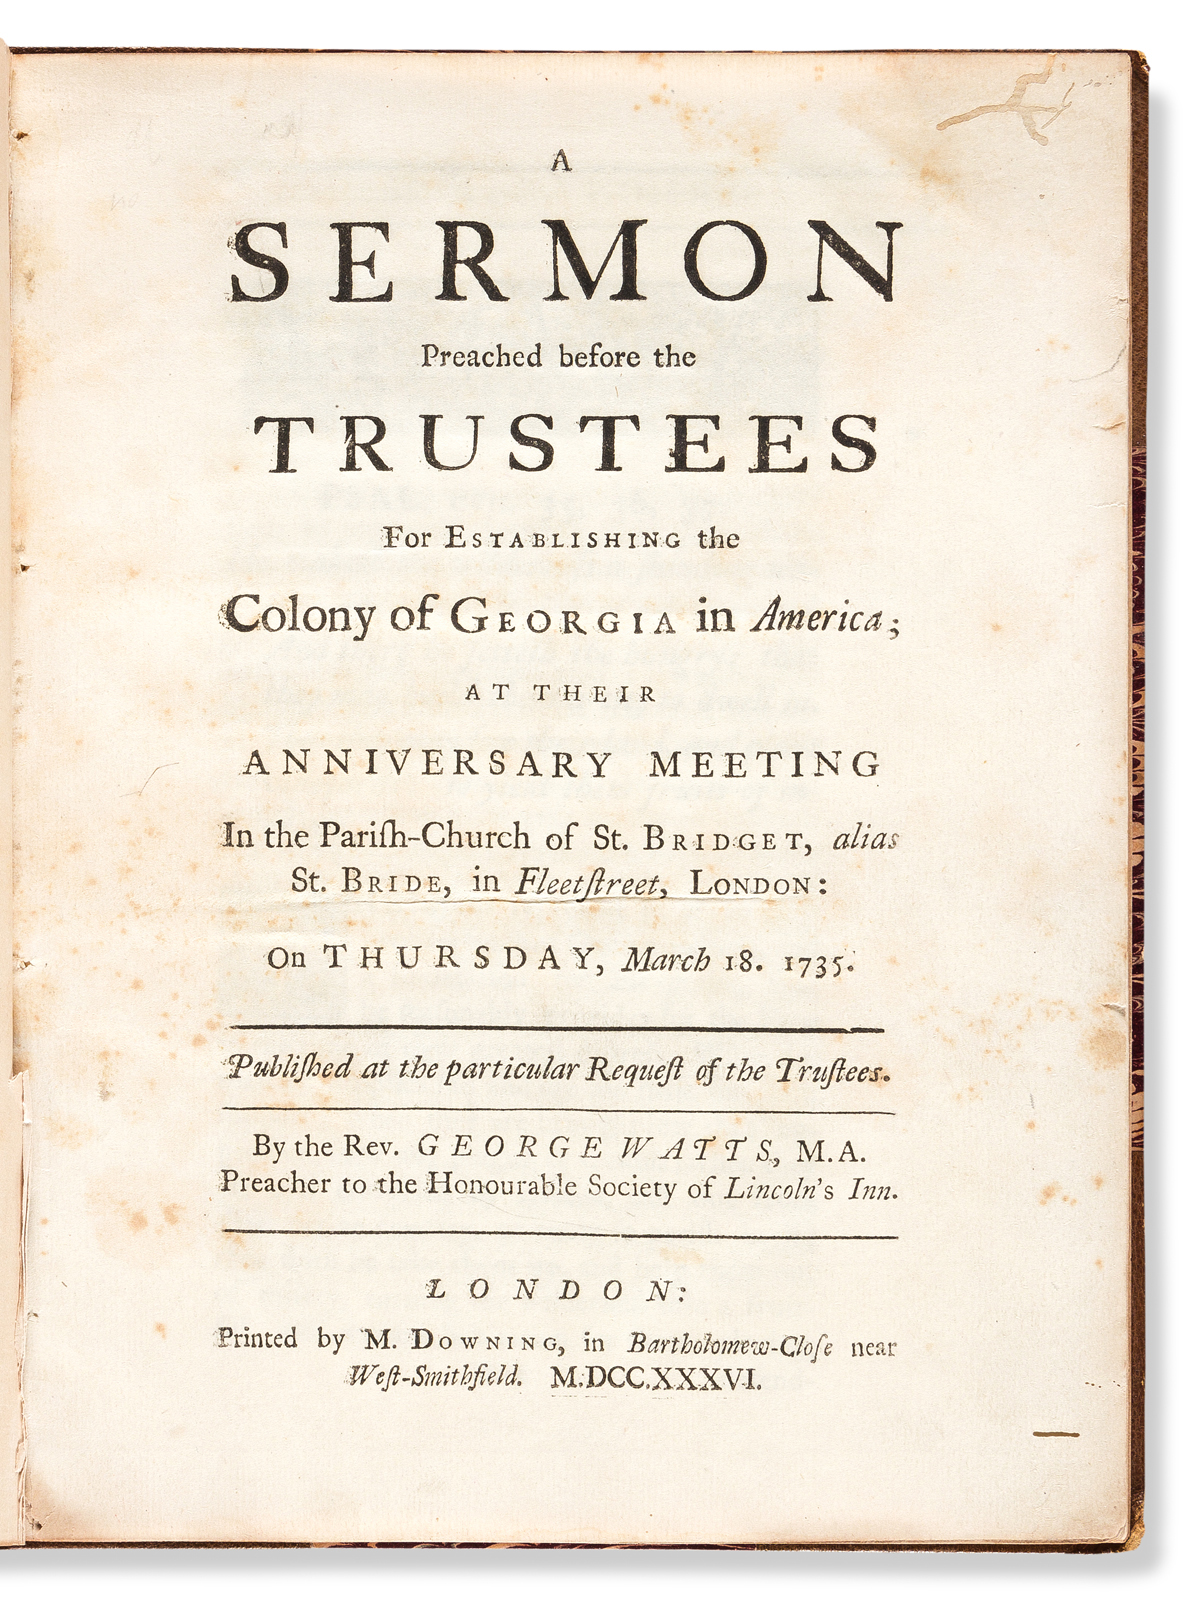 (GEORGIA.) George Watts. A Sermon Preached Before the Trustees for Establishing the Colony of Georgia in America.